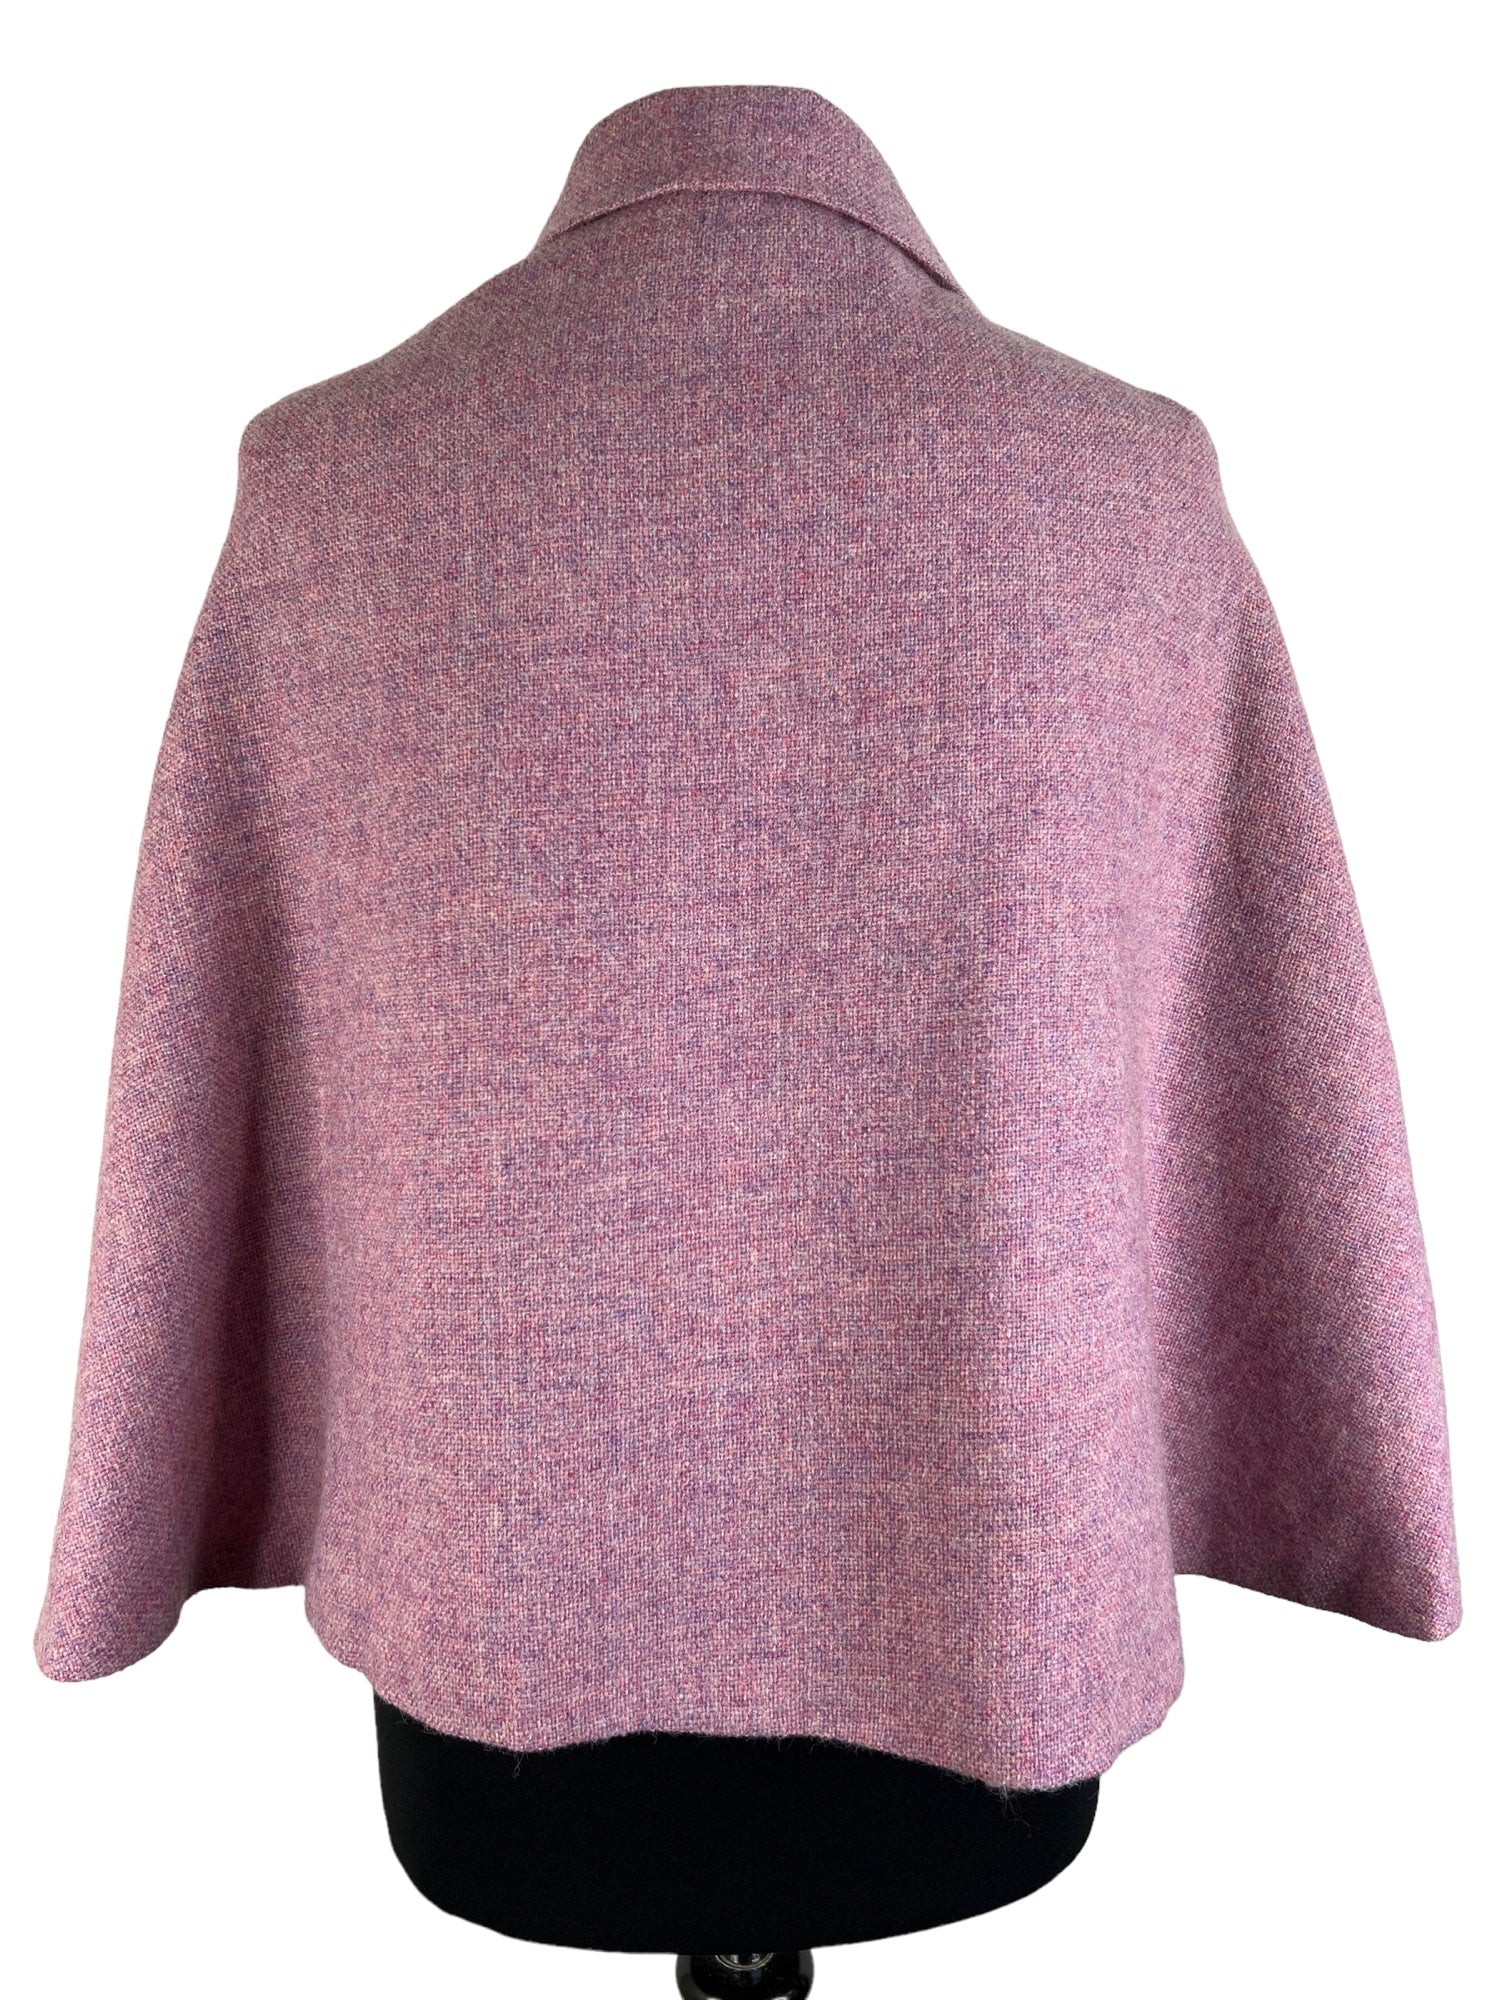 zero waste  Woven  wool  womens  vintage  UK  thrifted  thrift  sustainable  style  store  stitch detailing  slow fashion  short length  shop  second hand  save the planet  S  reuse  recycled  recycle  recycable  pure wool  pure new wool  preloved  pink  online  one button  ladies  fashion  ethical  Eco friendly  Eco  concious fashion  collared  collar  clothing  clothes  cape  button front  Birmingham  autumnal  autumn  60s  1960s